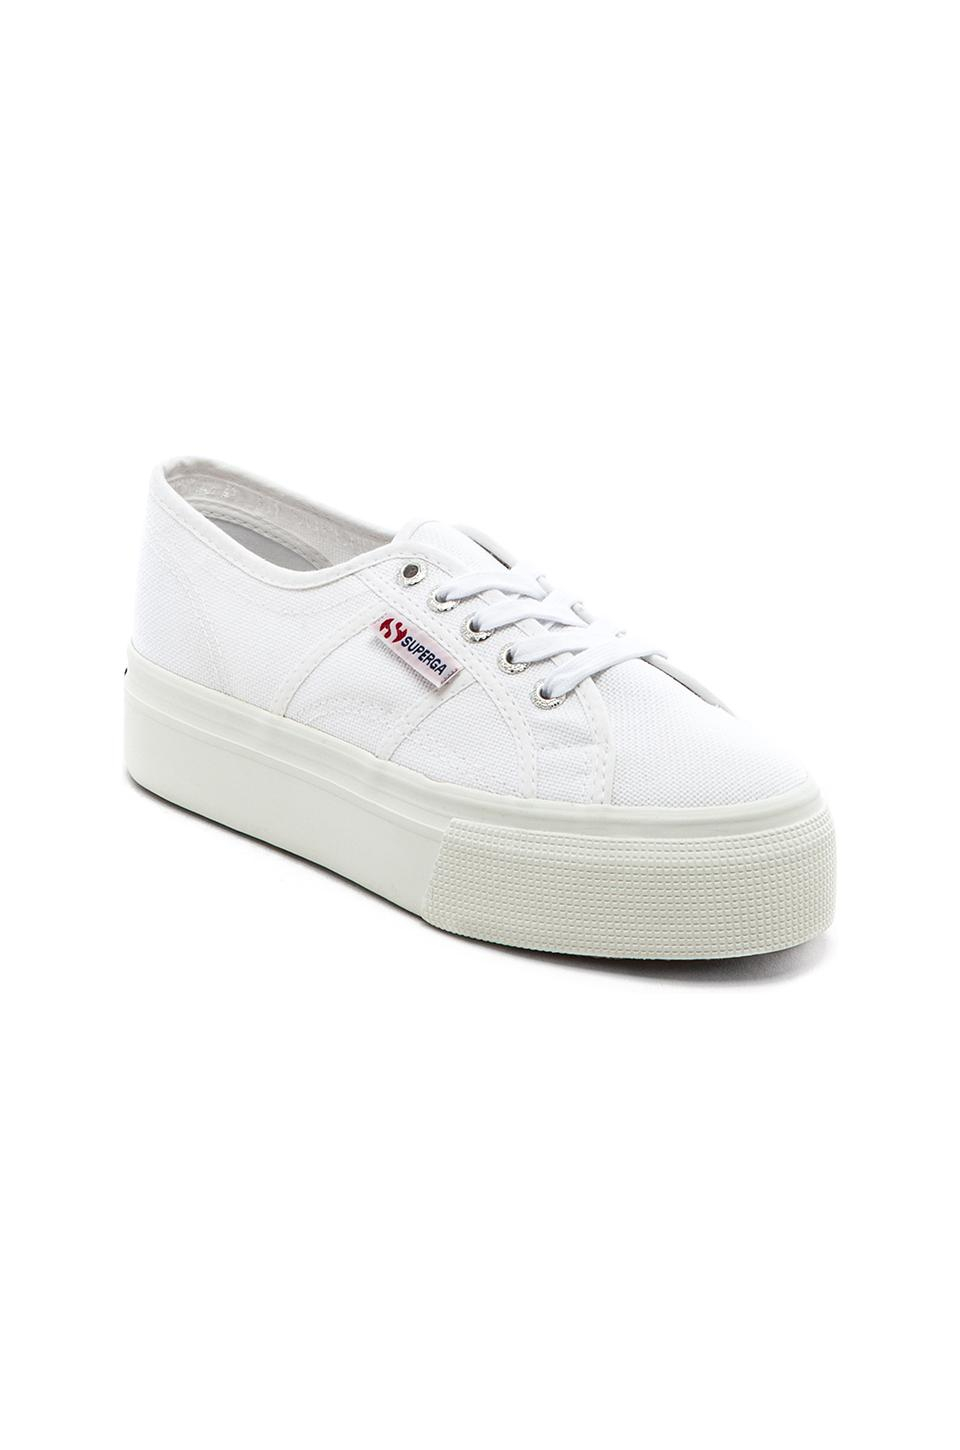 Superga Lace-Up Canvas Sneakers in White | Lyst